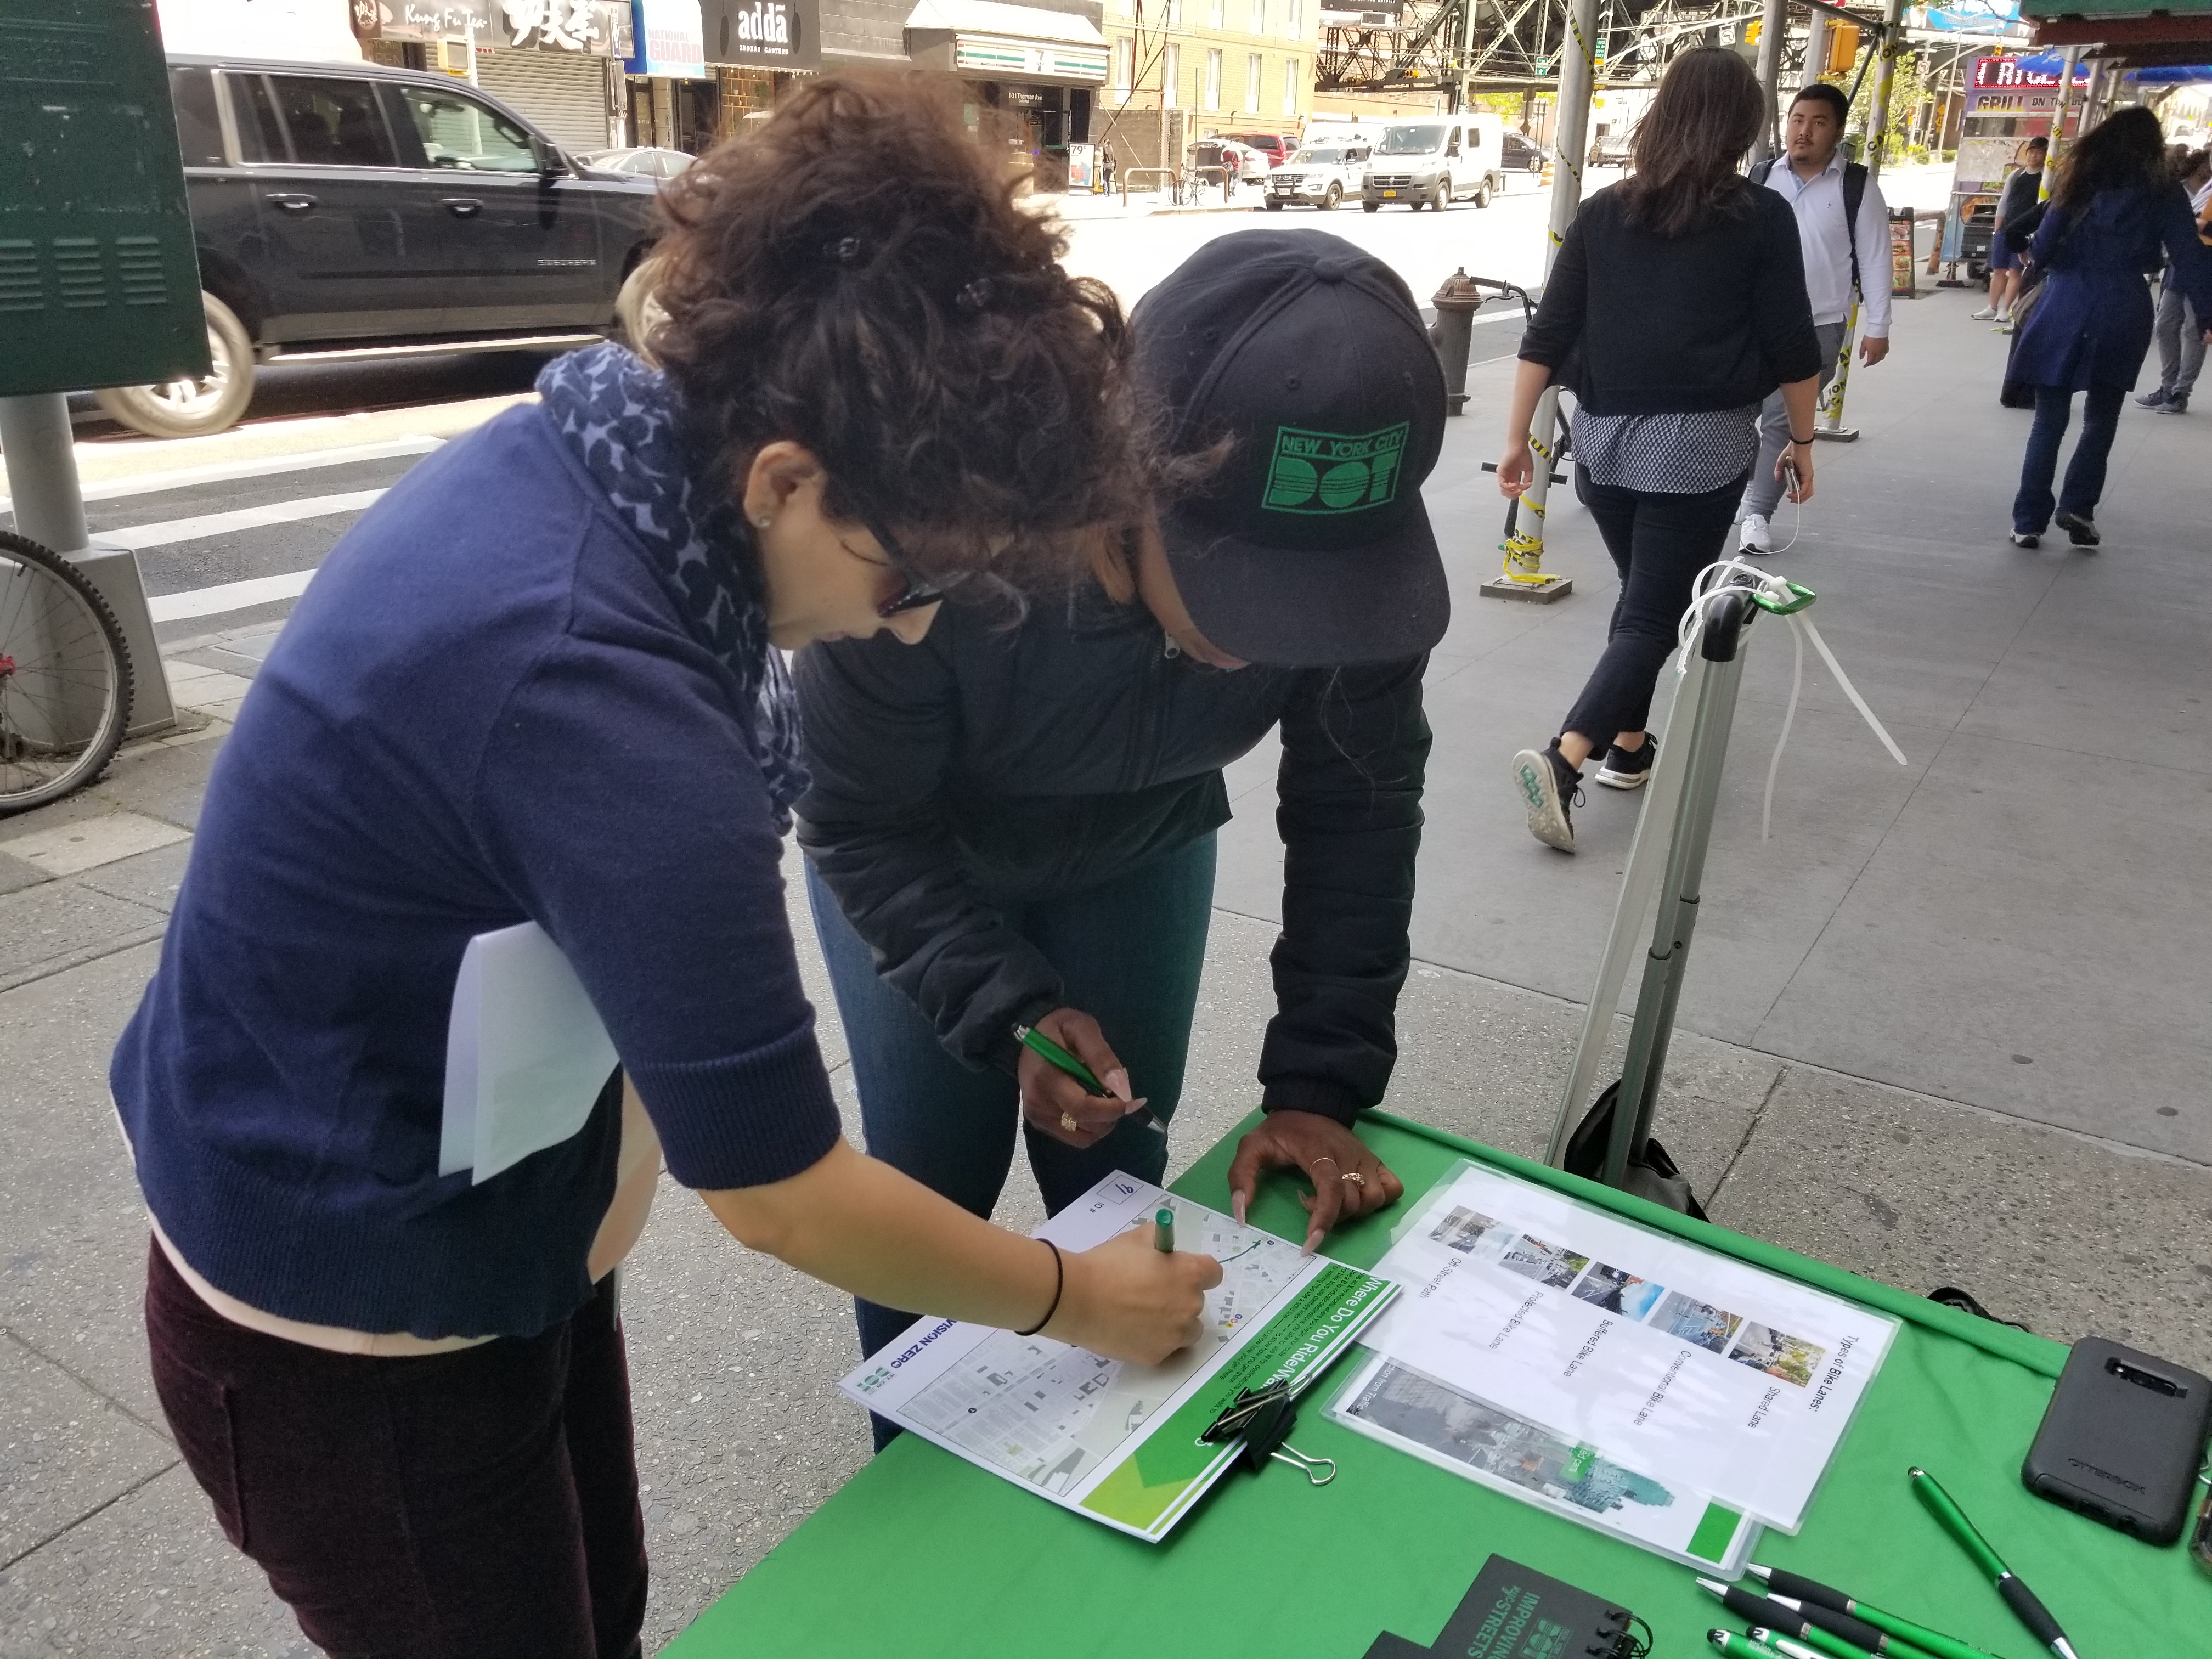 DOT Street Ambassador helping a resident participate in a mapping activity during outreach in 2019